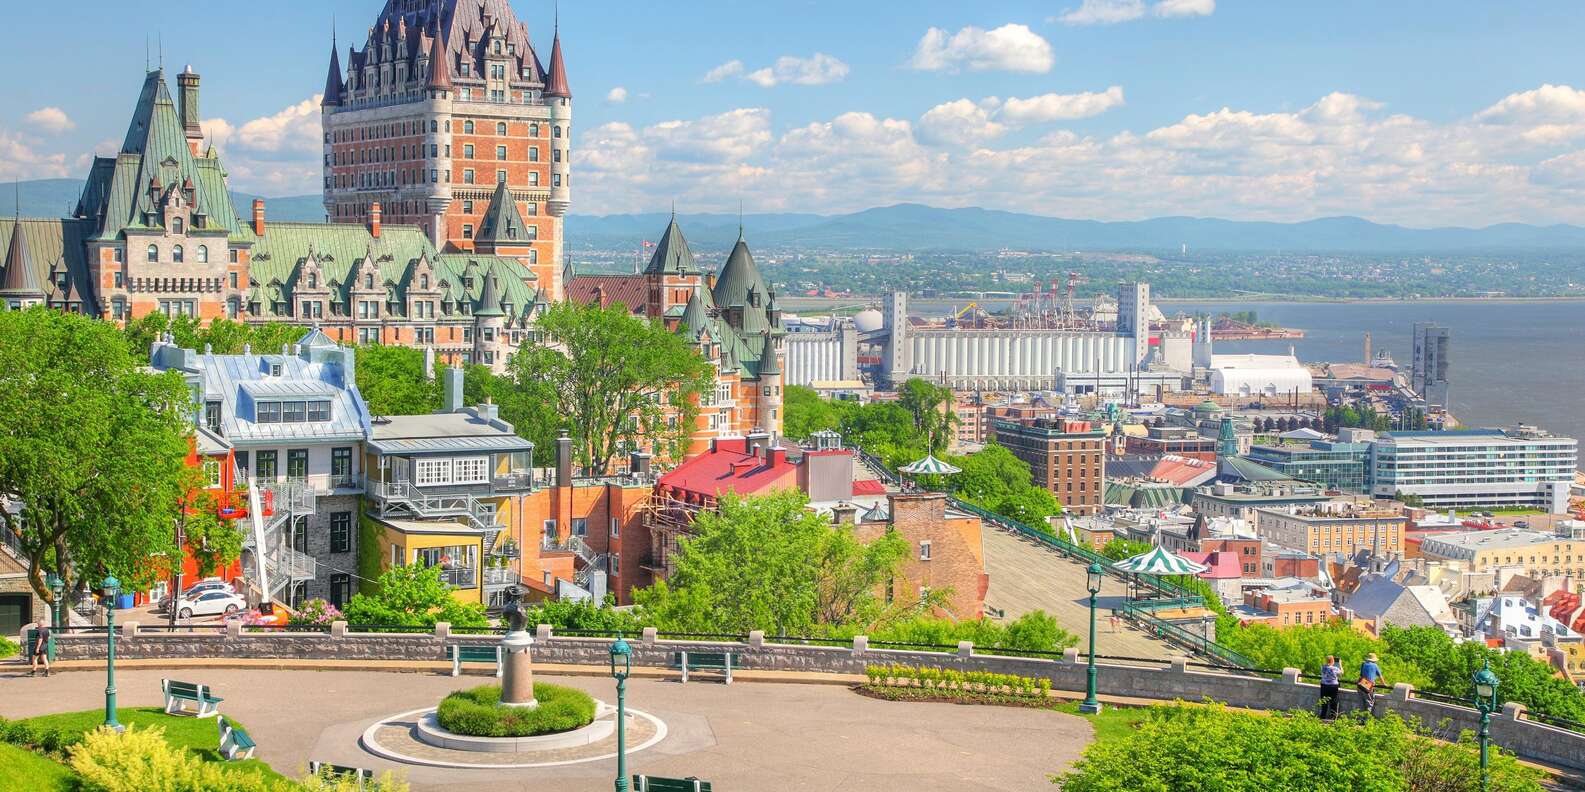 best things to do in Montreal